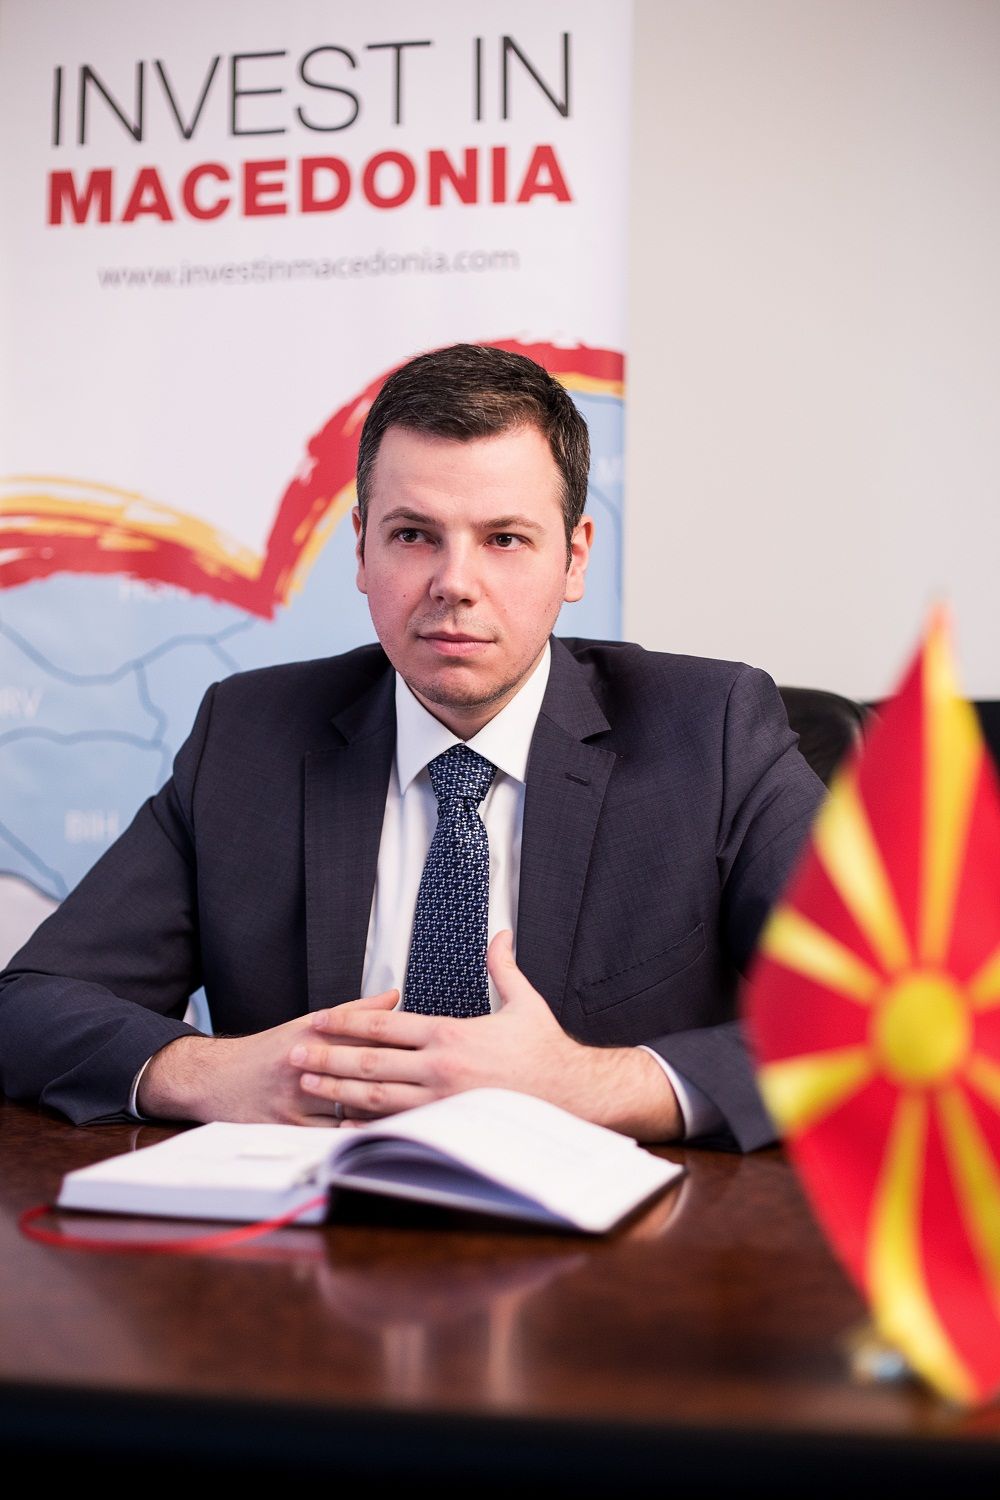 The stage is set for more Danish-Macedonian trade and investment